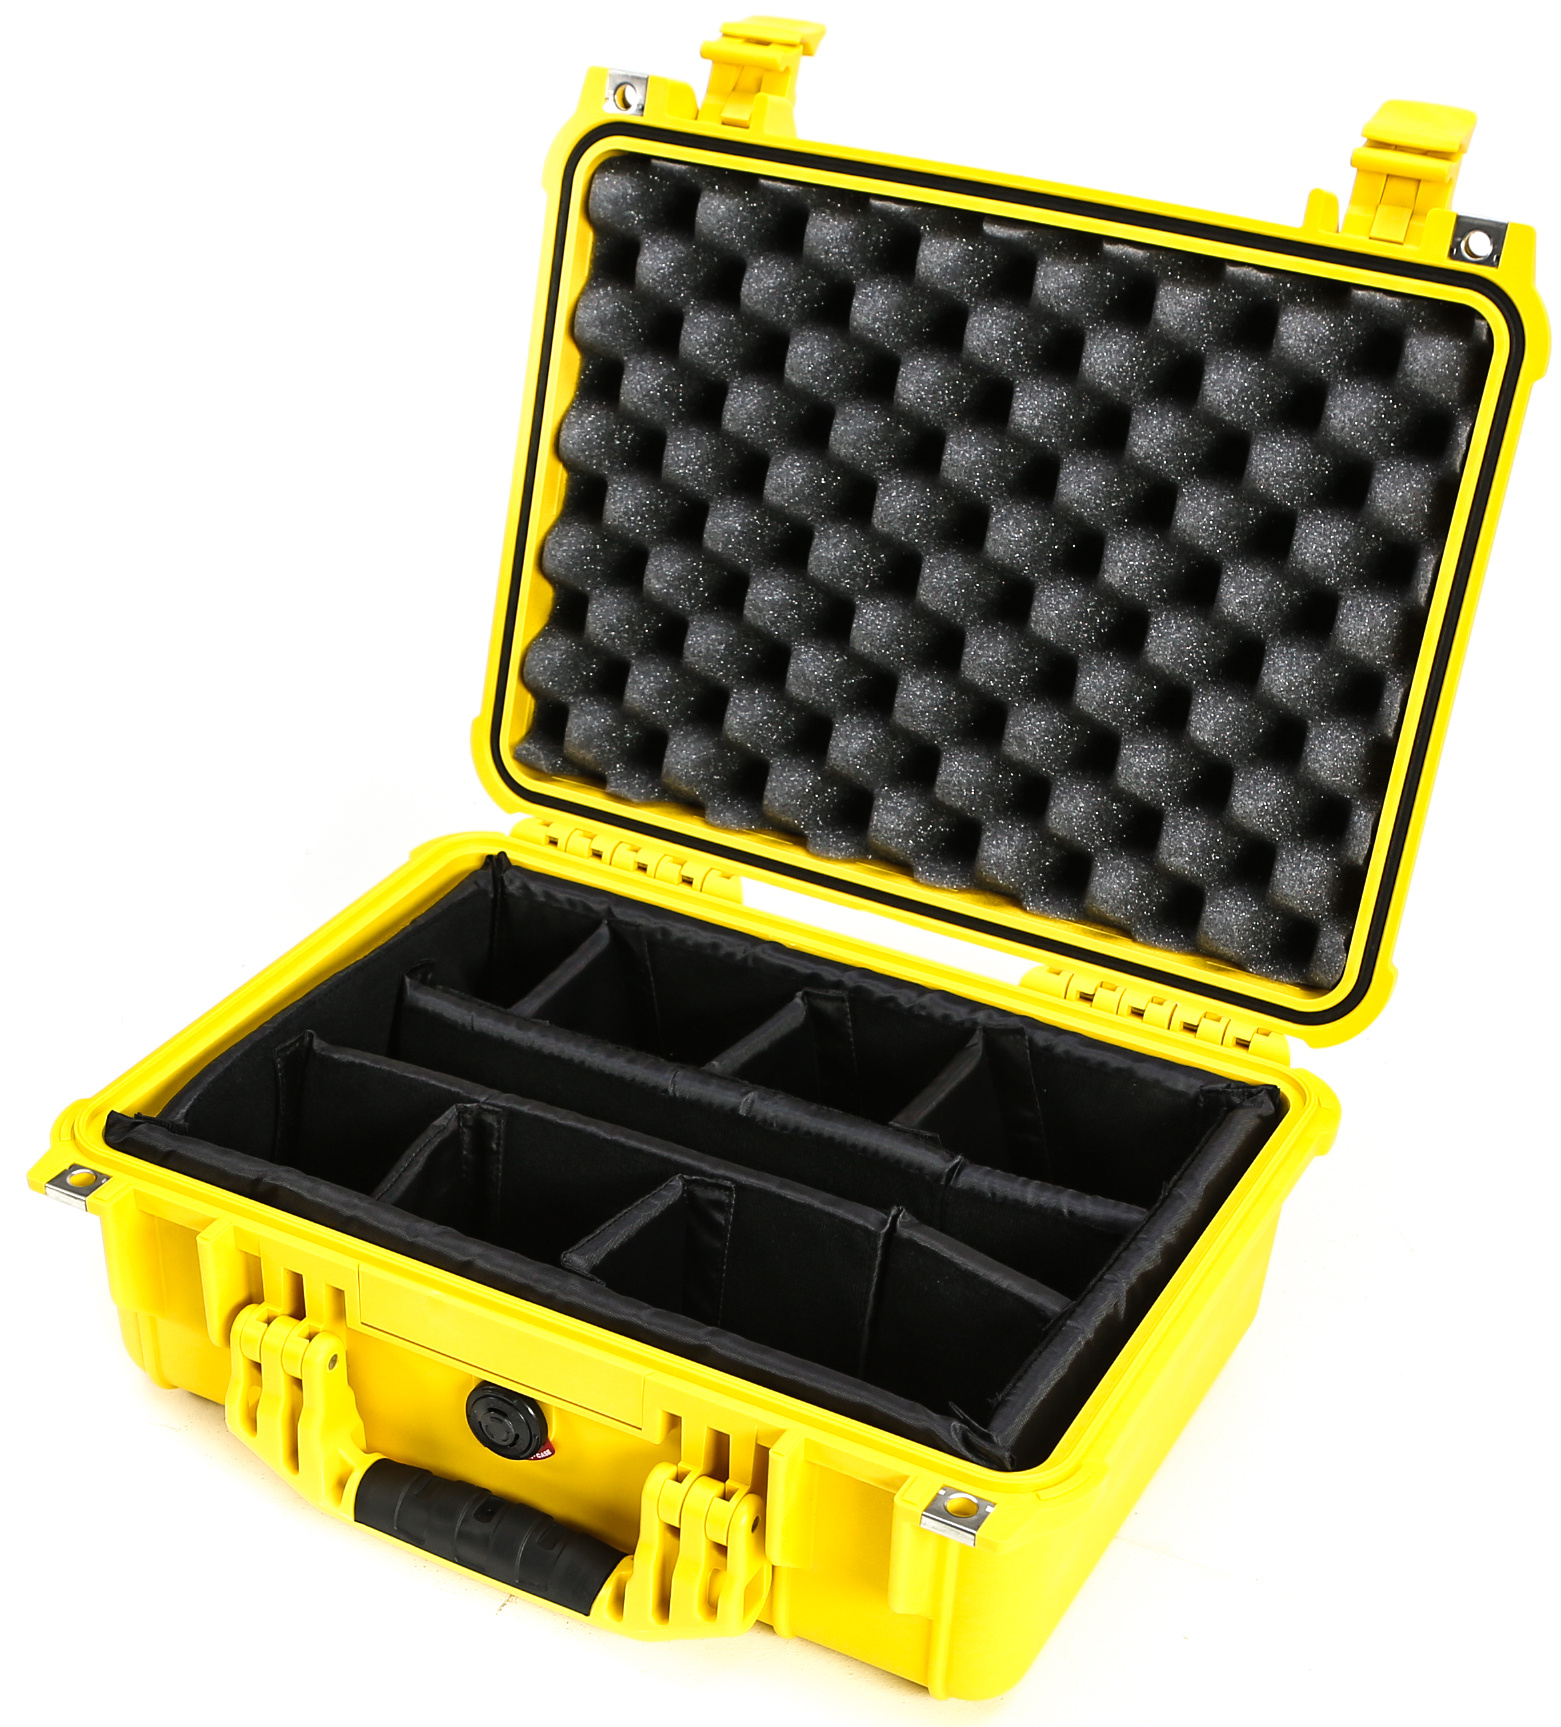 Pelican 1454 Case with Padded Dividers (Yellow)